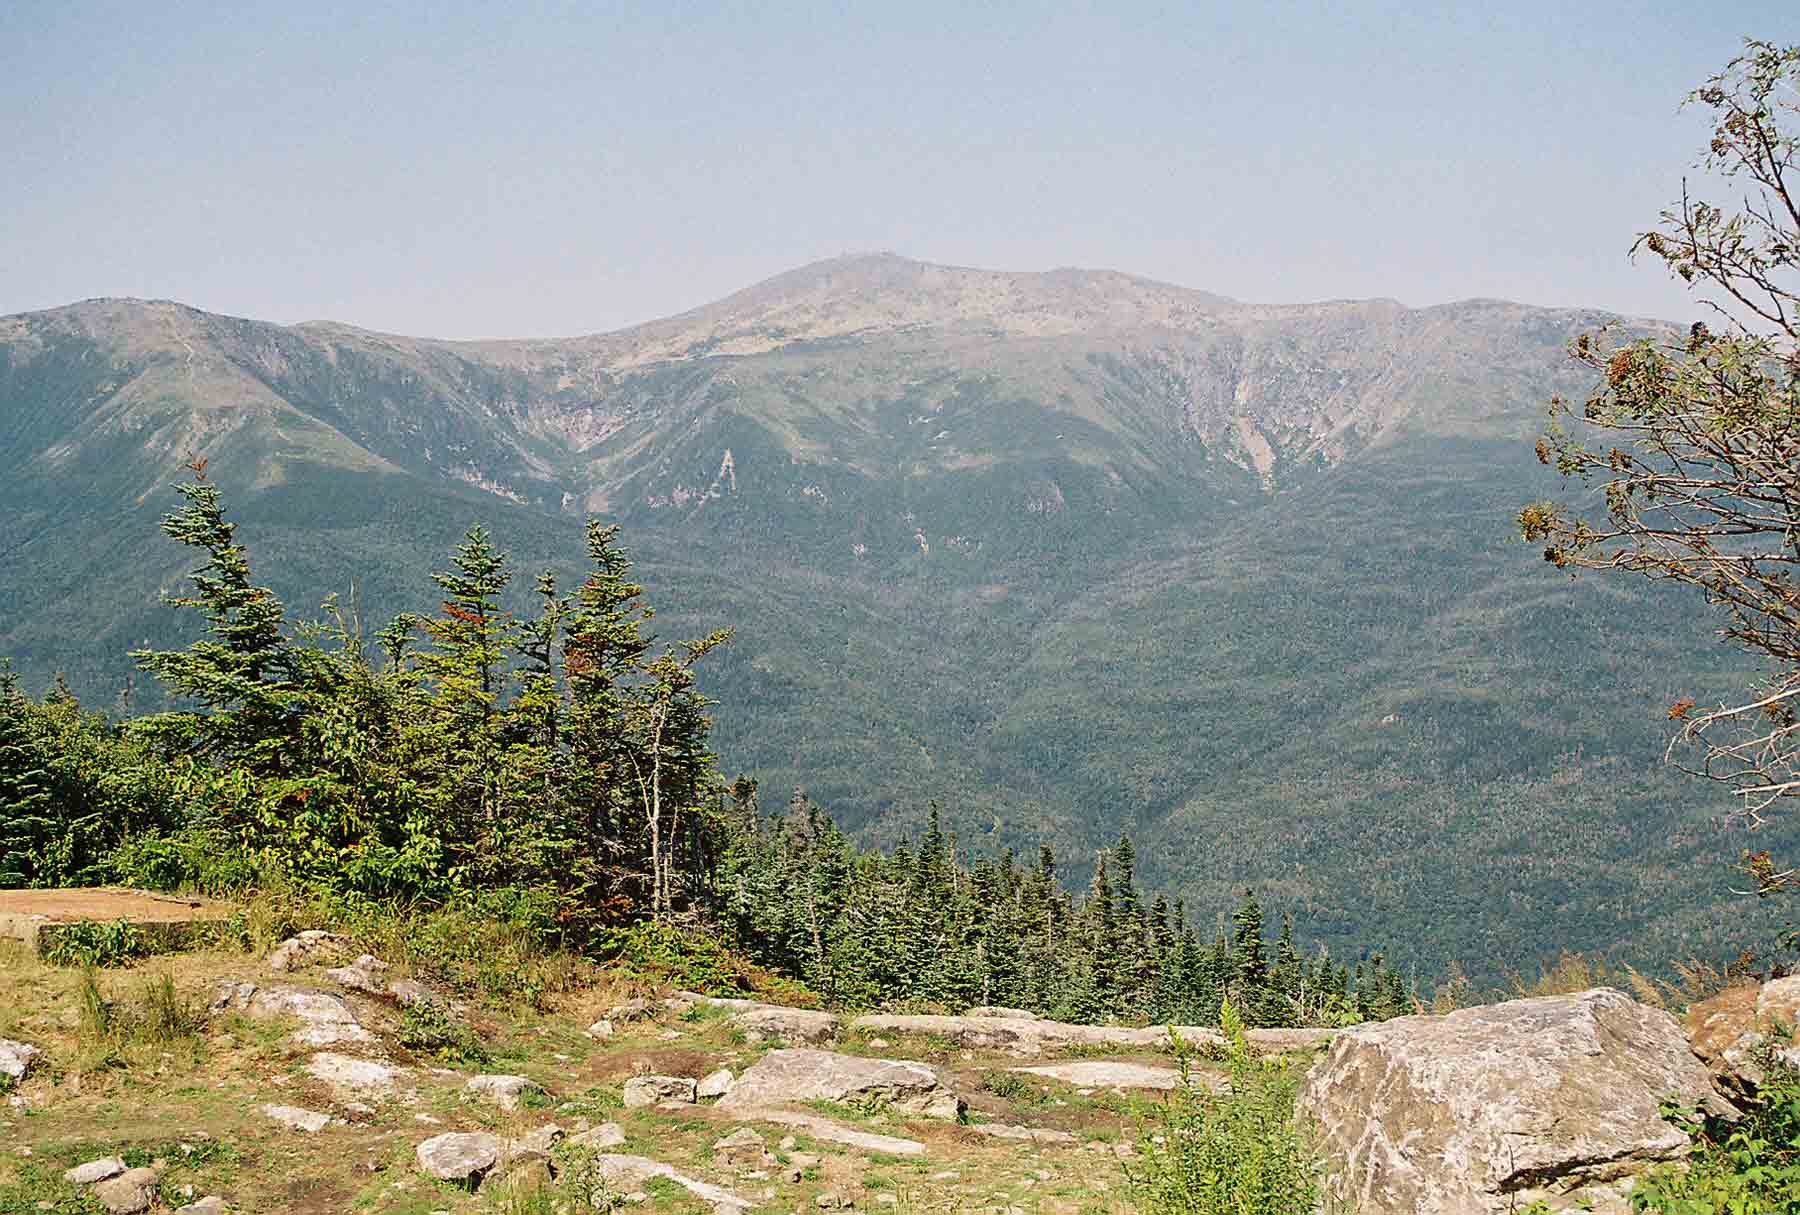 mm 18.2 - Mount Washington from top of Wildcat Mountain ski lift (August '04). Courtesy dlcul@conncoll.edu